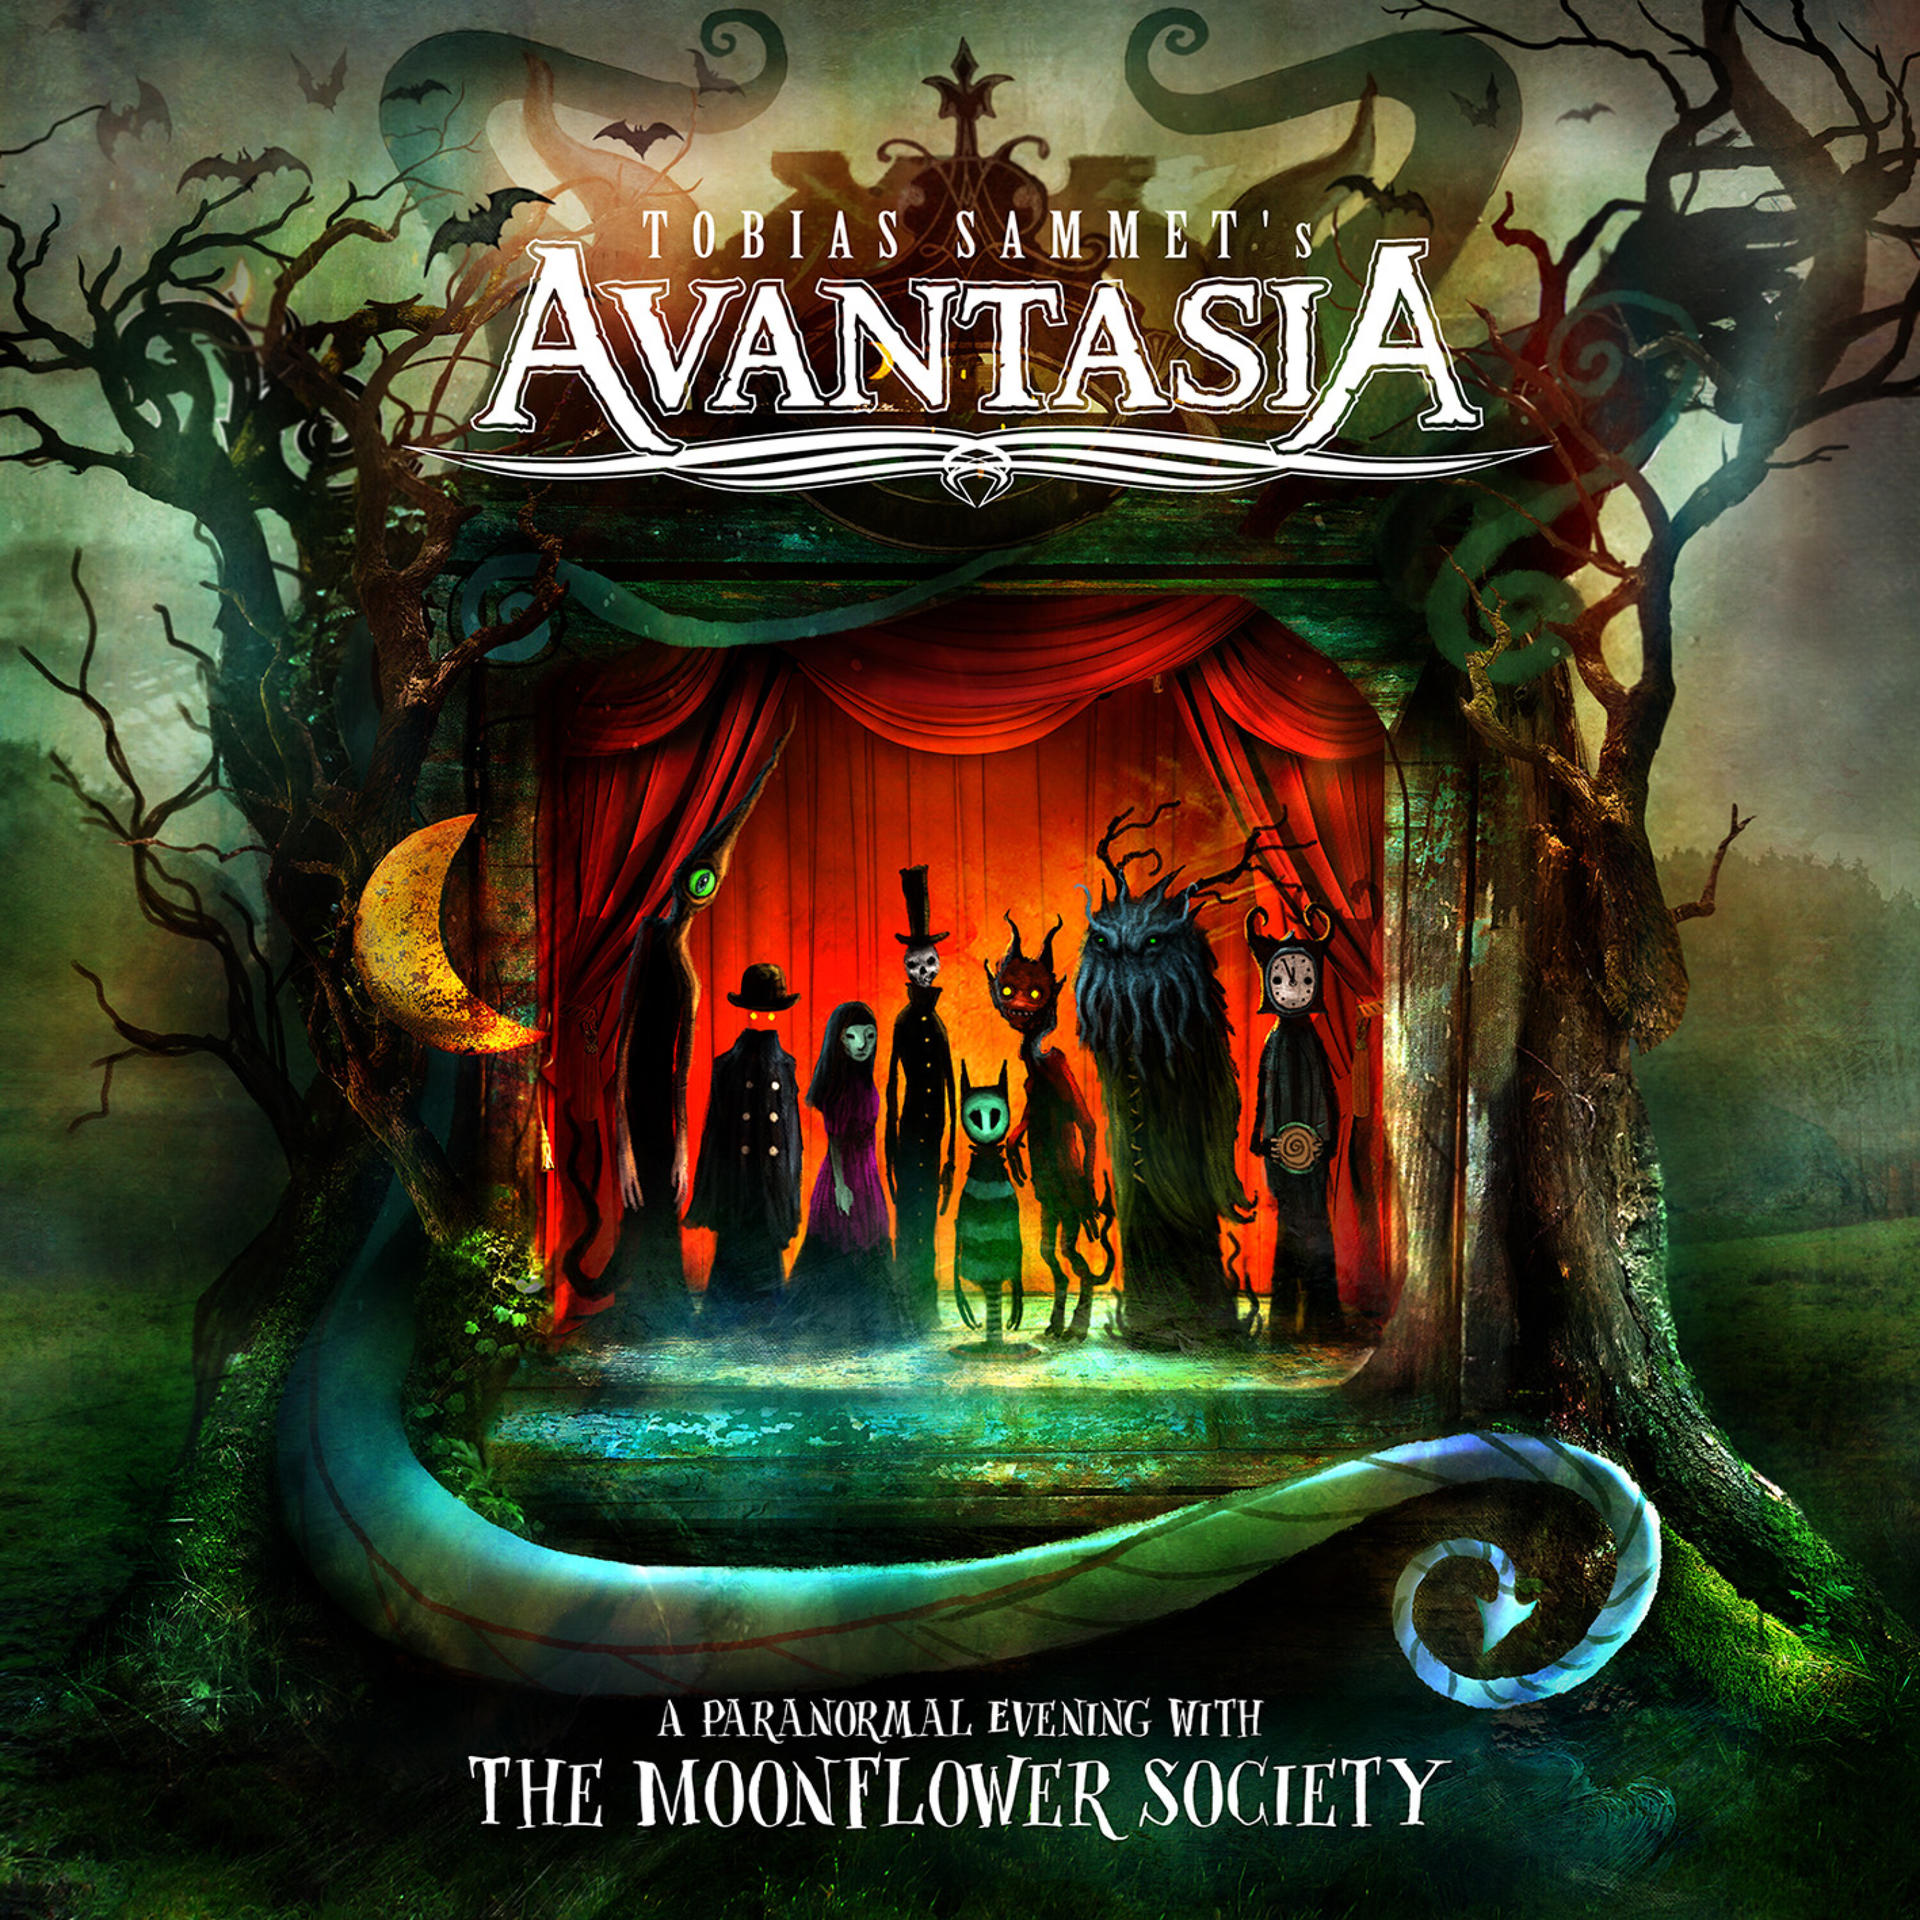 Avantasia - A Moonflower Paranormal The 2LP Society With Evening (Vinyl) PIC 